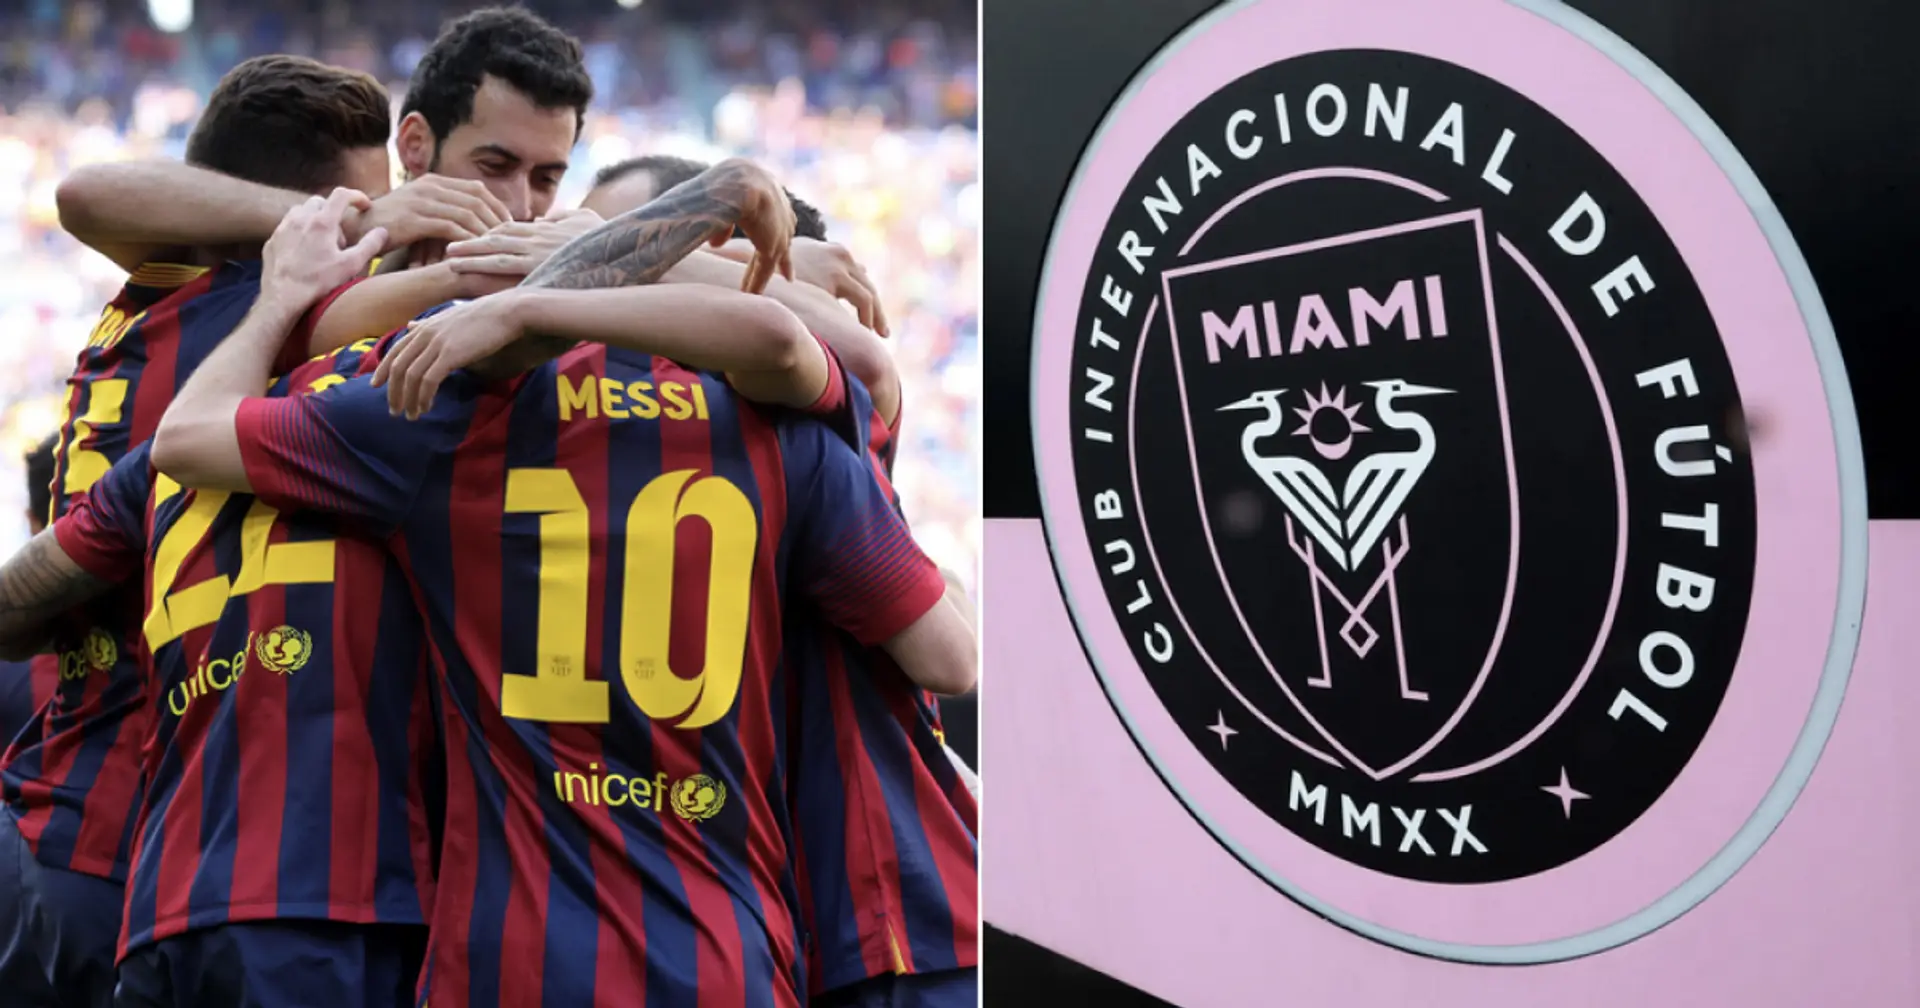 Ex-Barca manager reportedly set to take over at Inter Miami – he coached all of Messi, Busquets and Alba